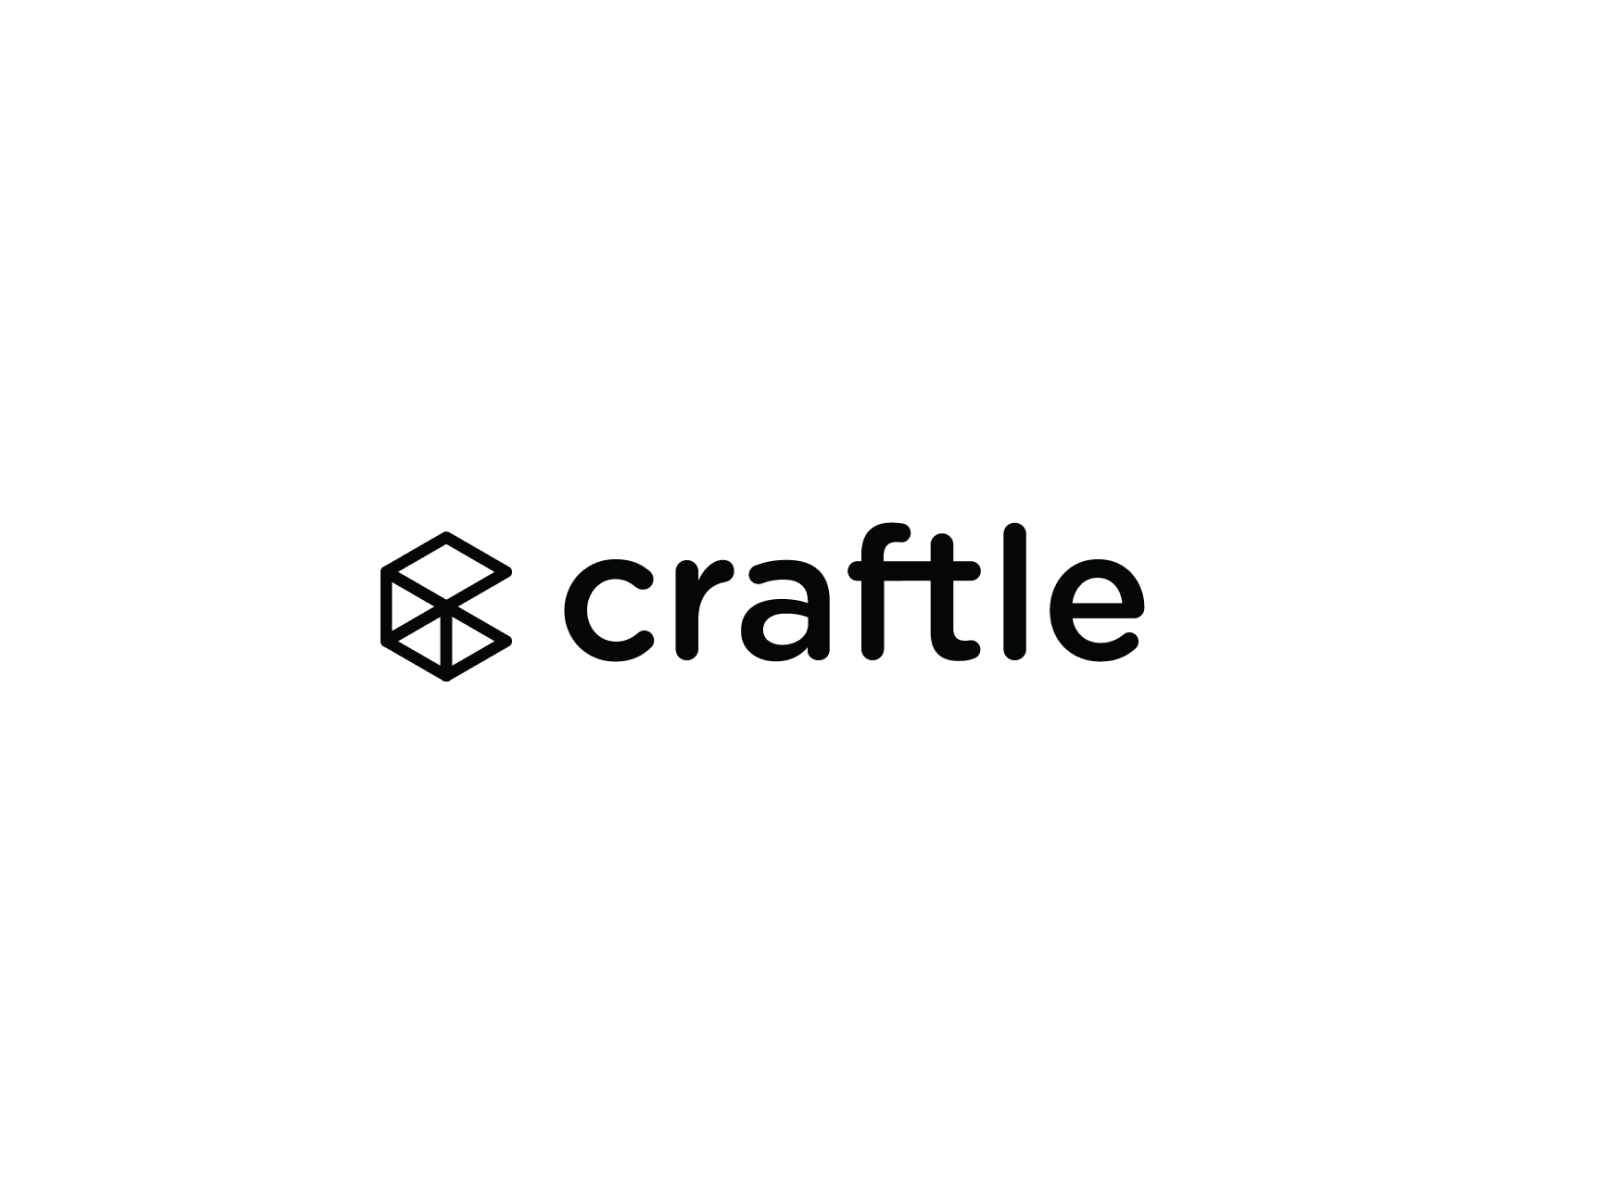 Craftle Branding by Madest Studio on Dribbble